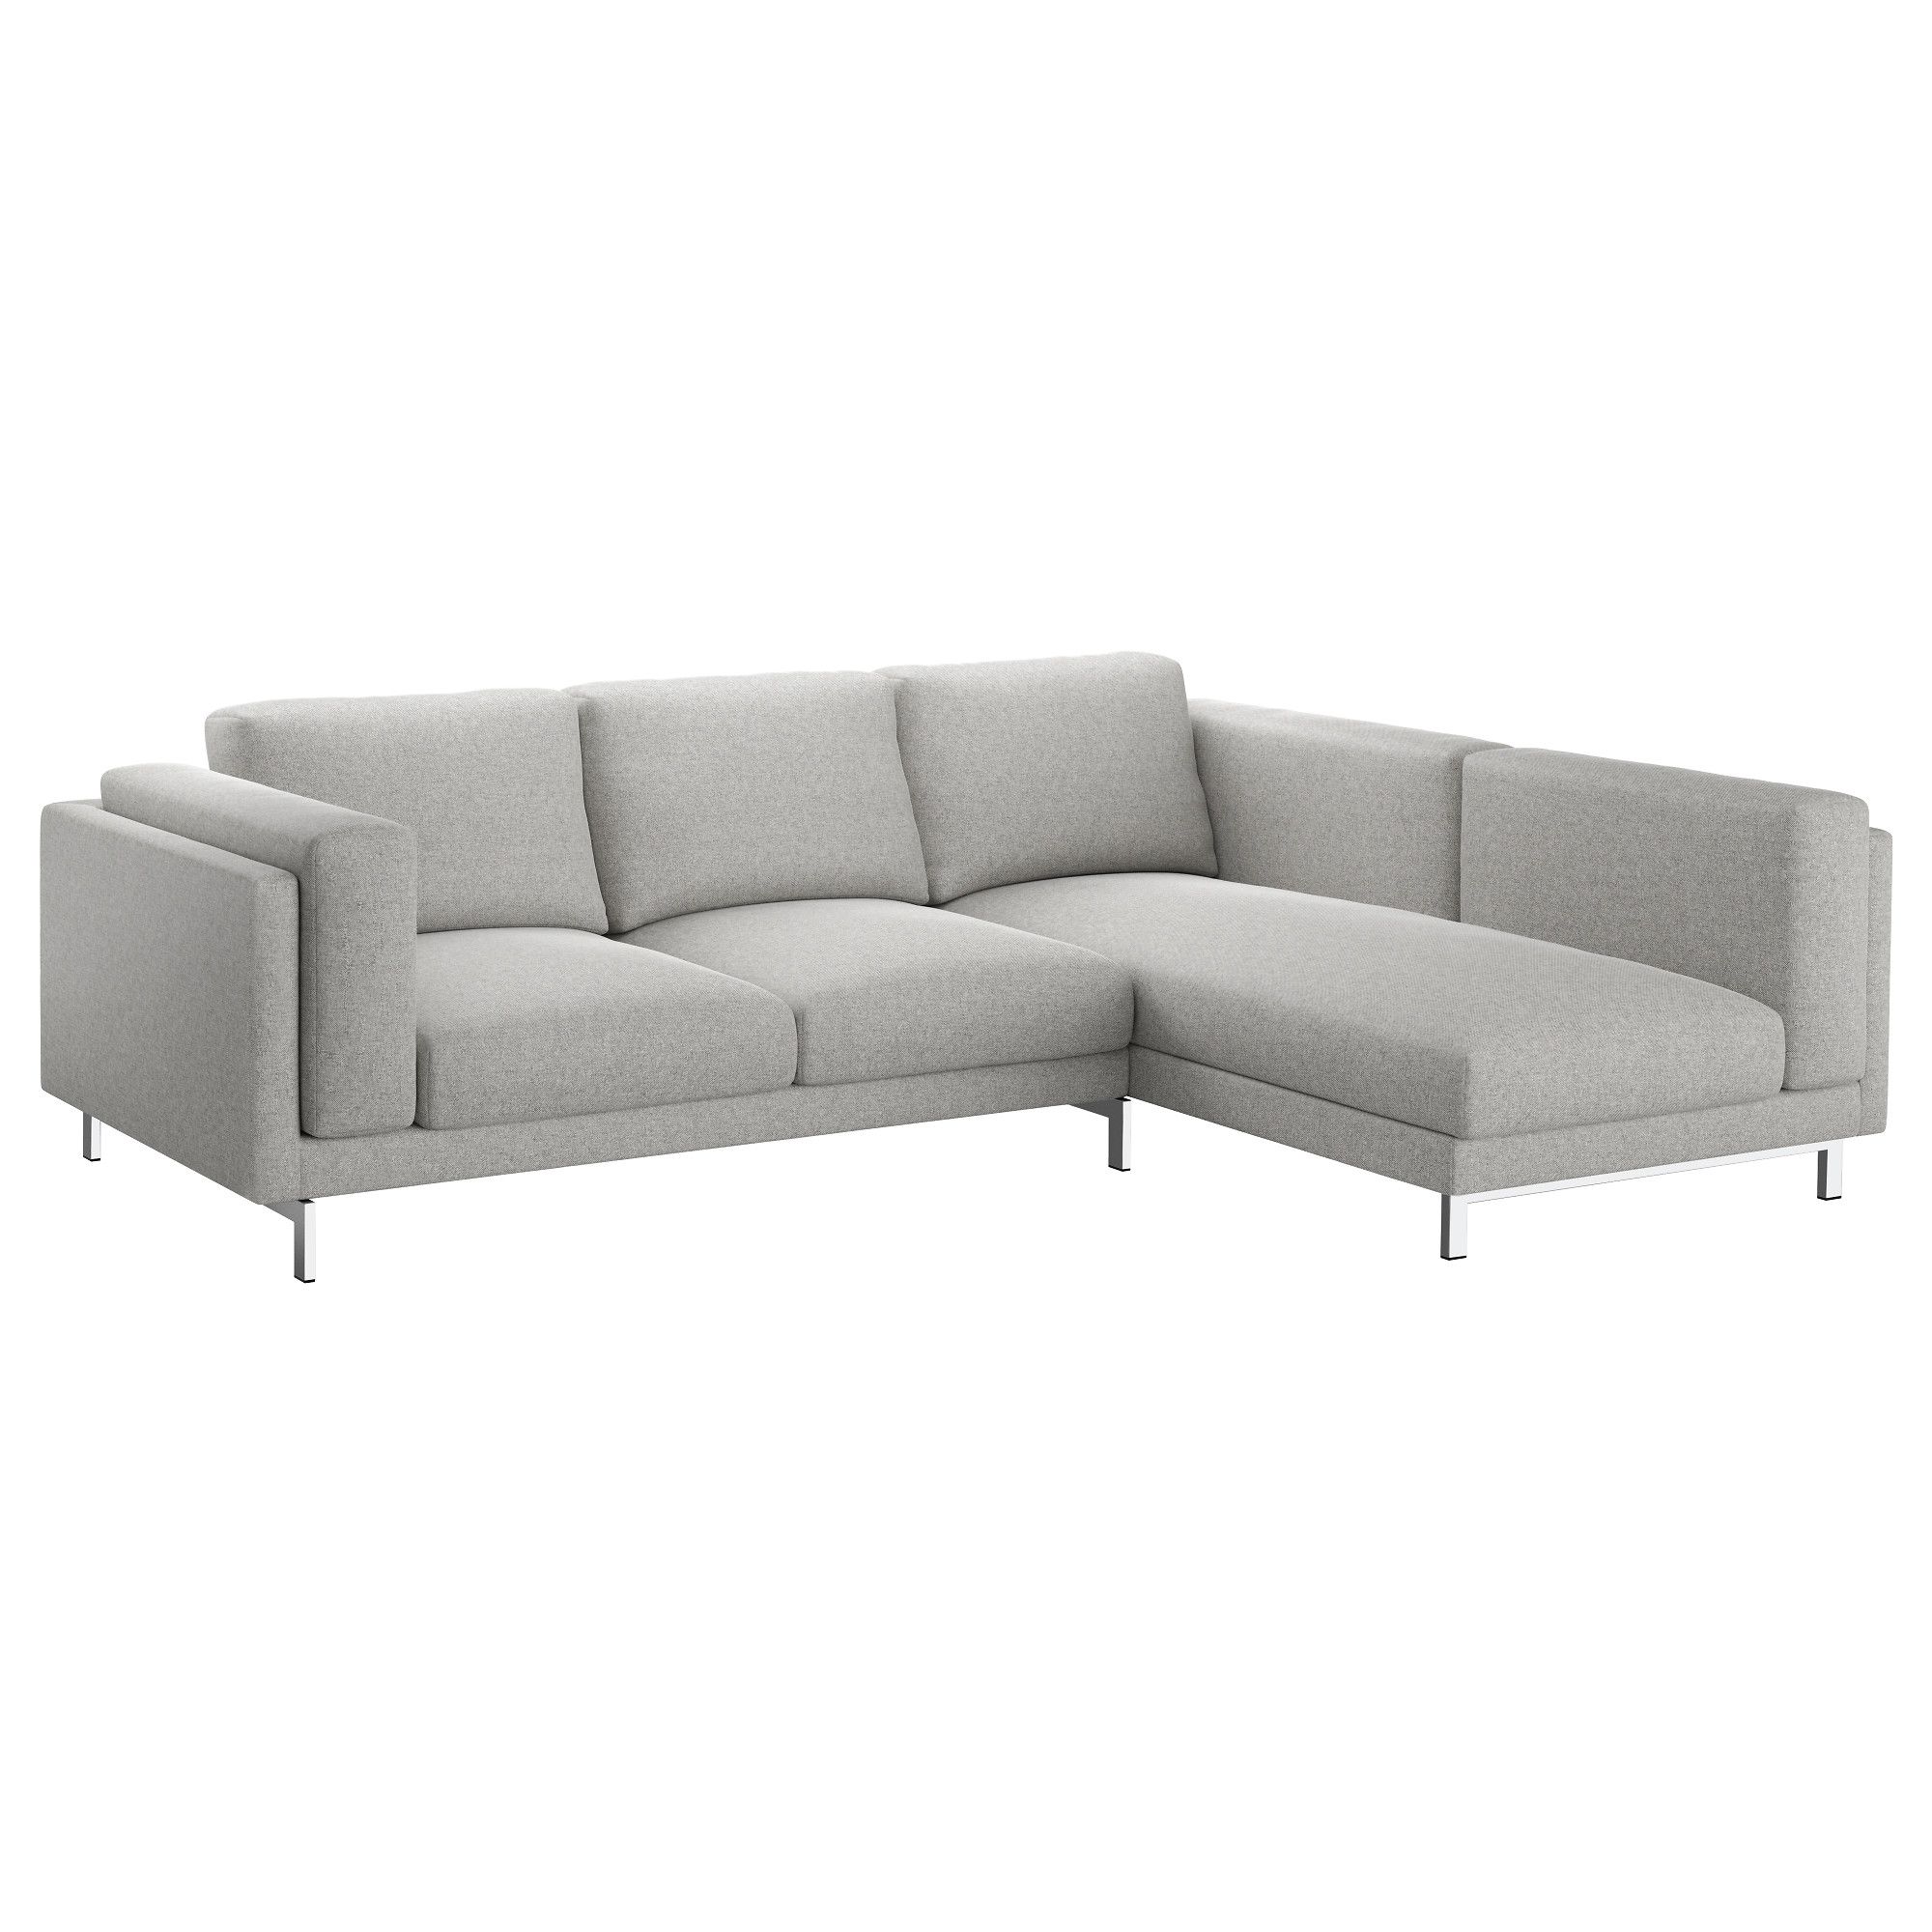 Sectional Sofas At Ikea Pertaining To Current Nockeby Sofa – With Chaise, Left/tallmyra White/black, Chrome (View 1 of 15)